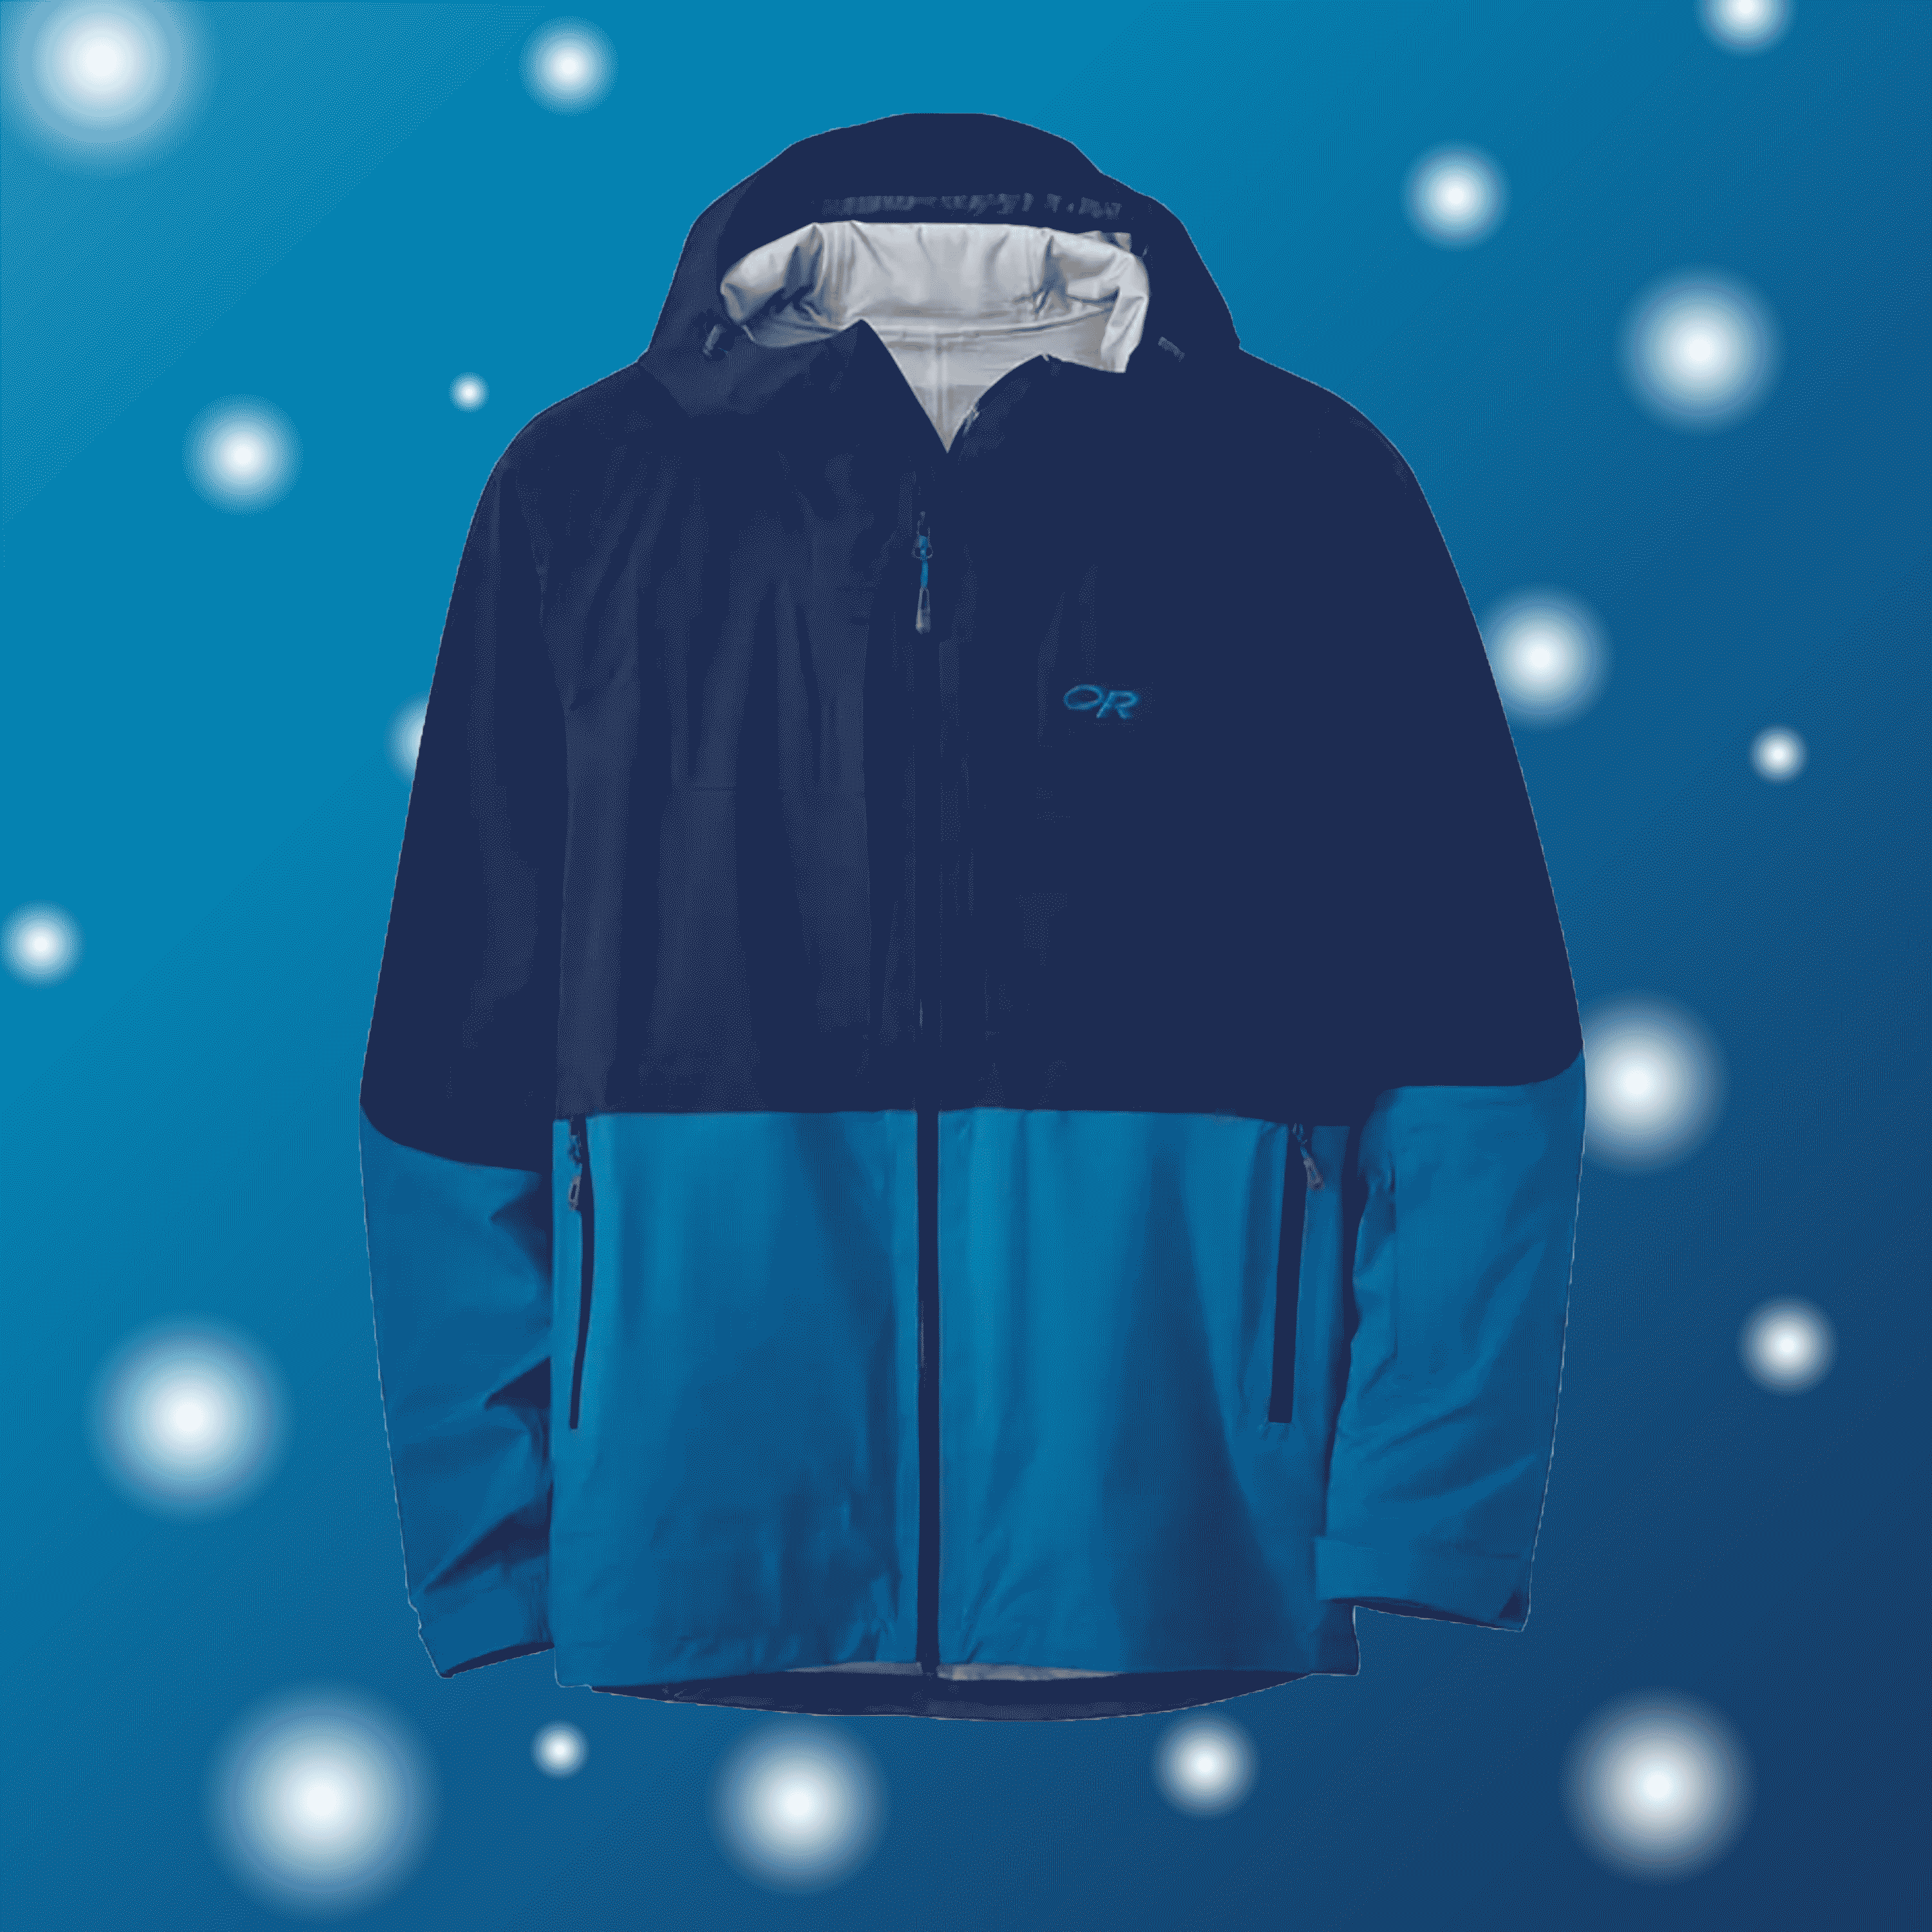 A blue jacket by Outdoor Research